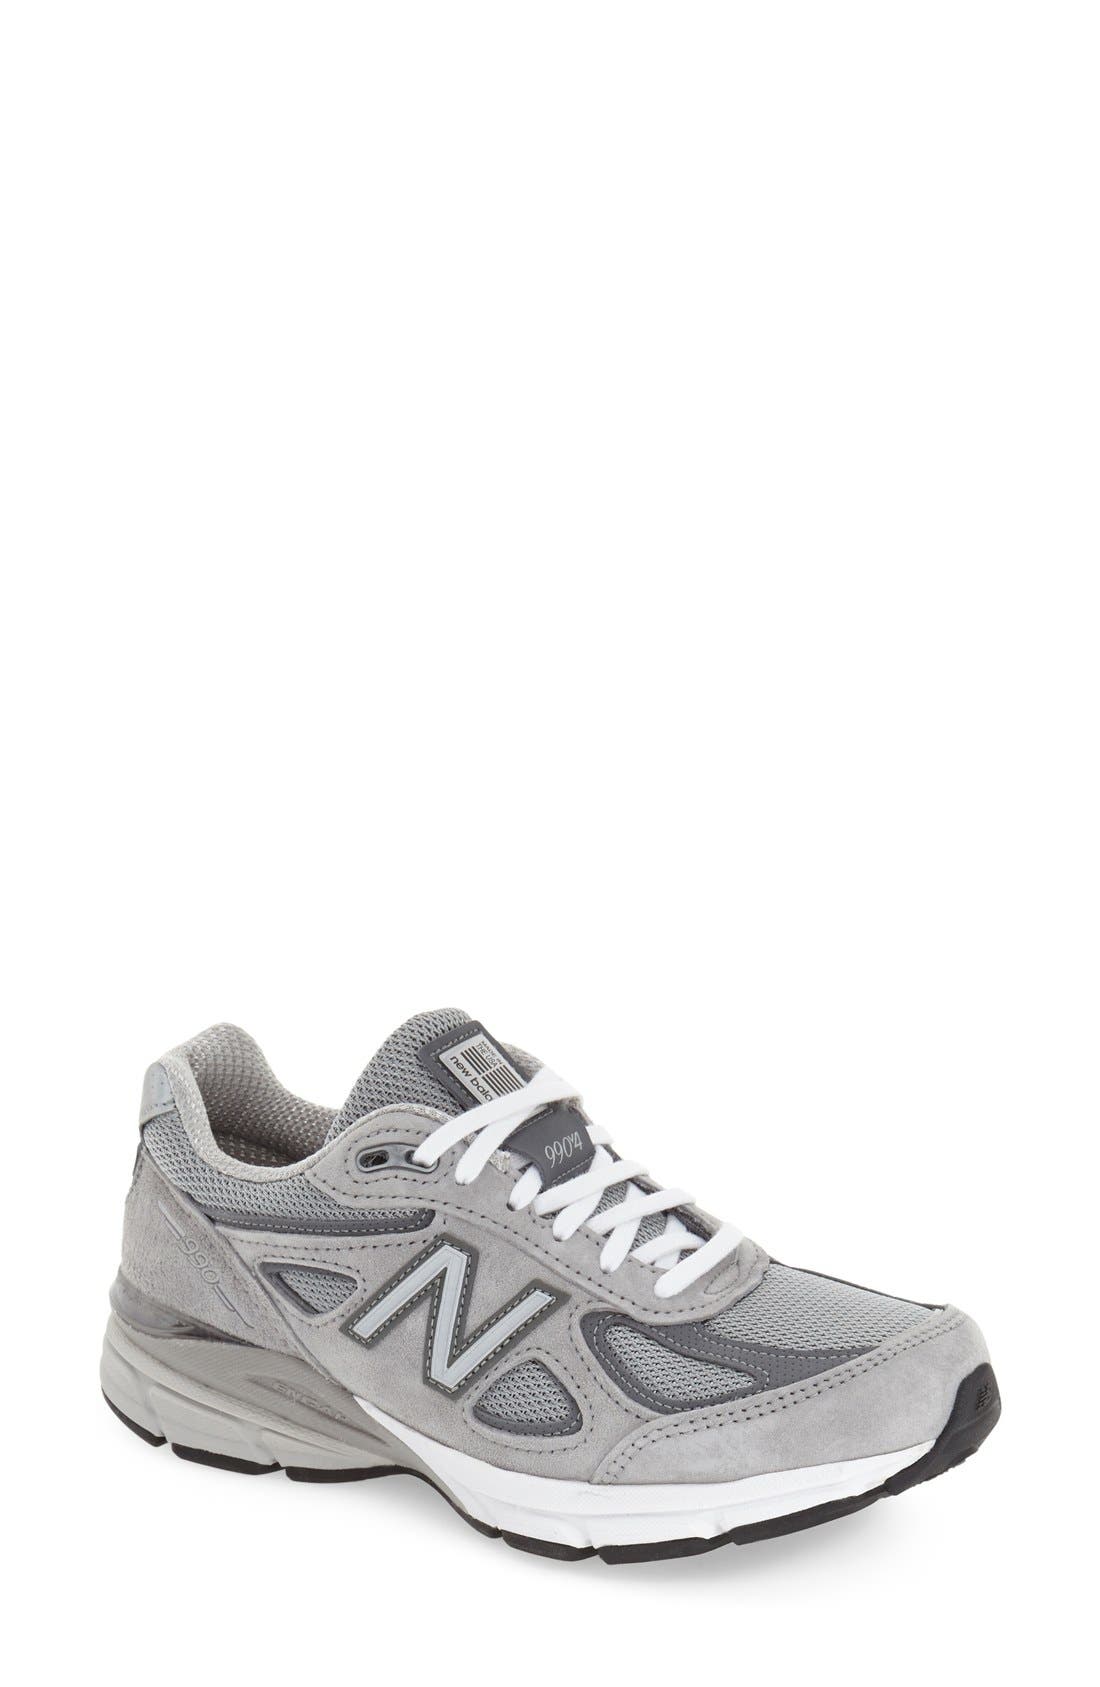 new balance womens shoes nordstrom